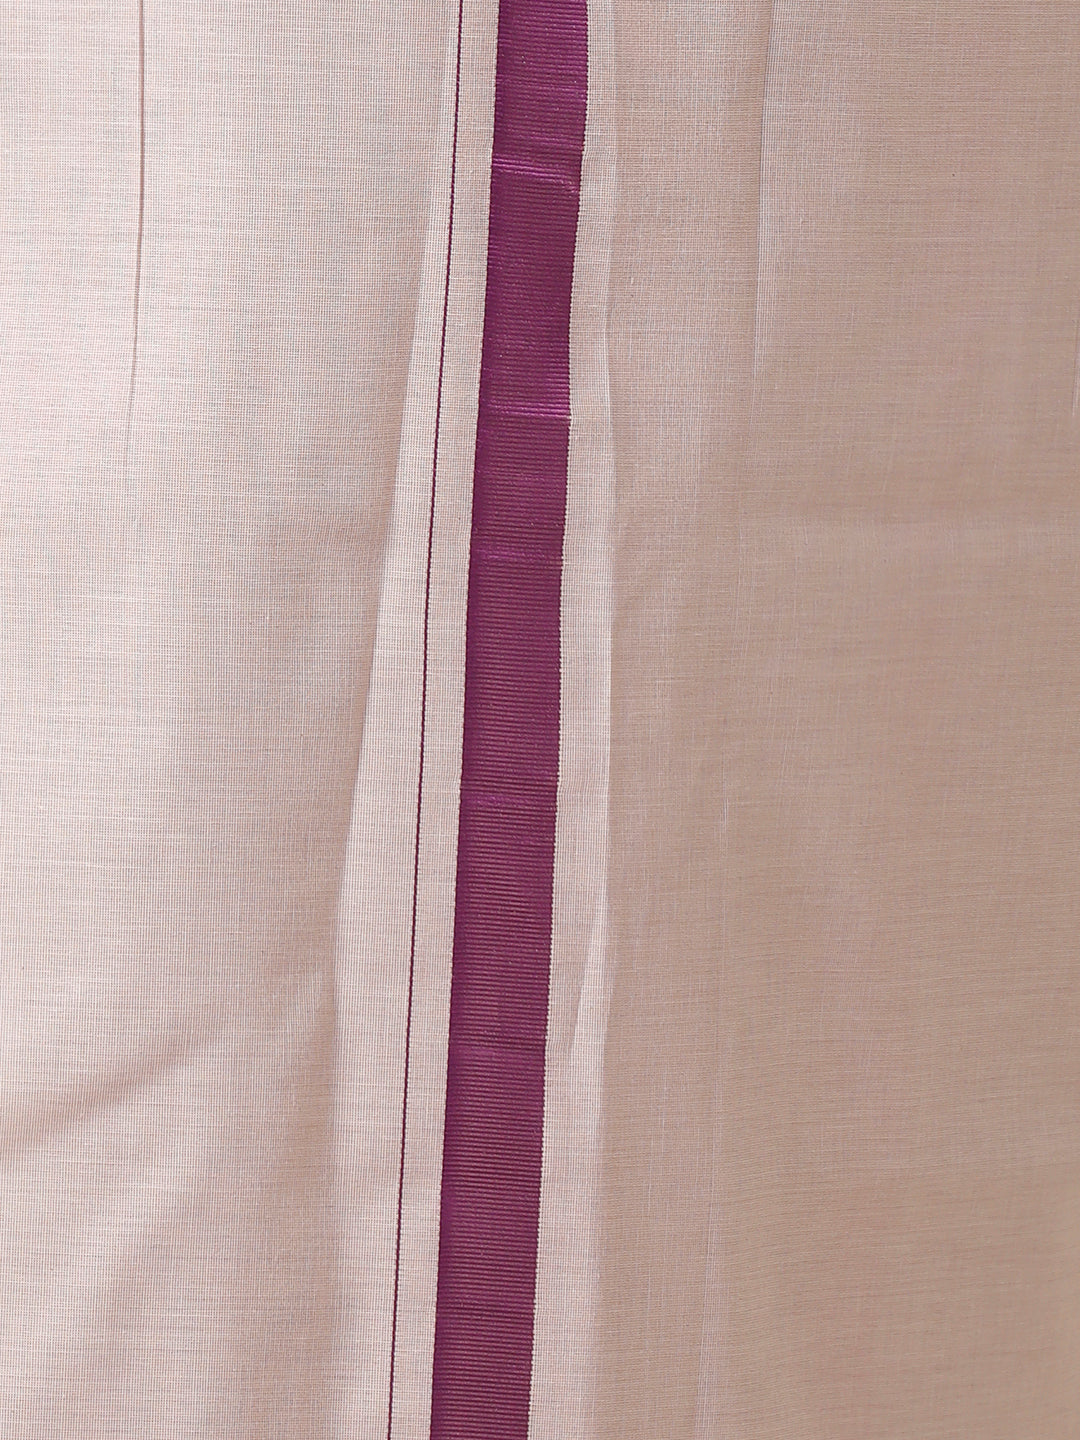 Mens Color Dhoti with Fancy Jari Border Extreme Purple